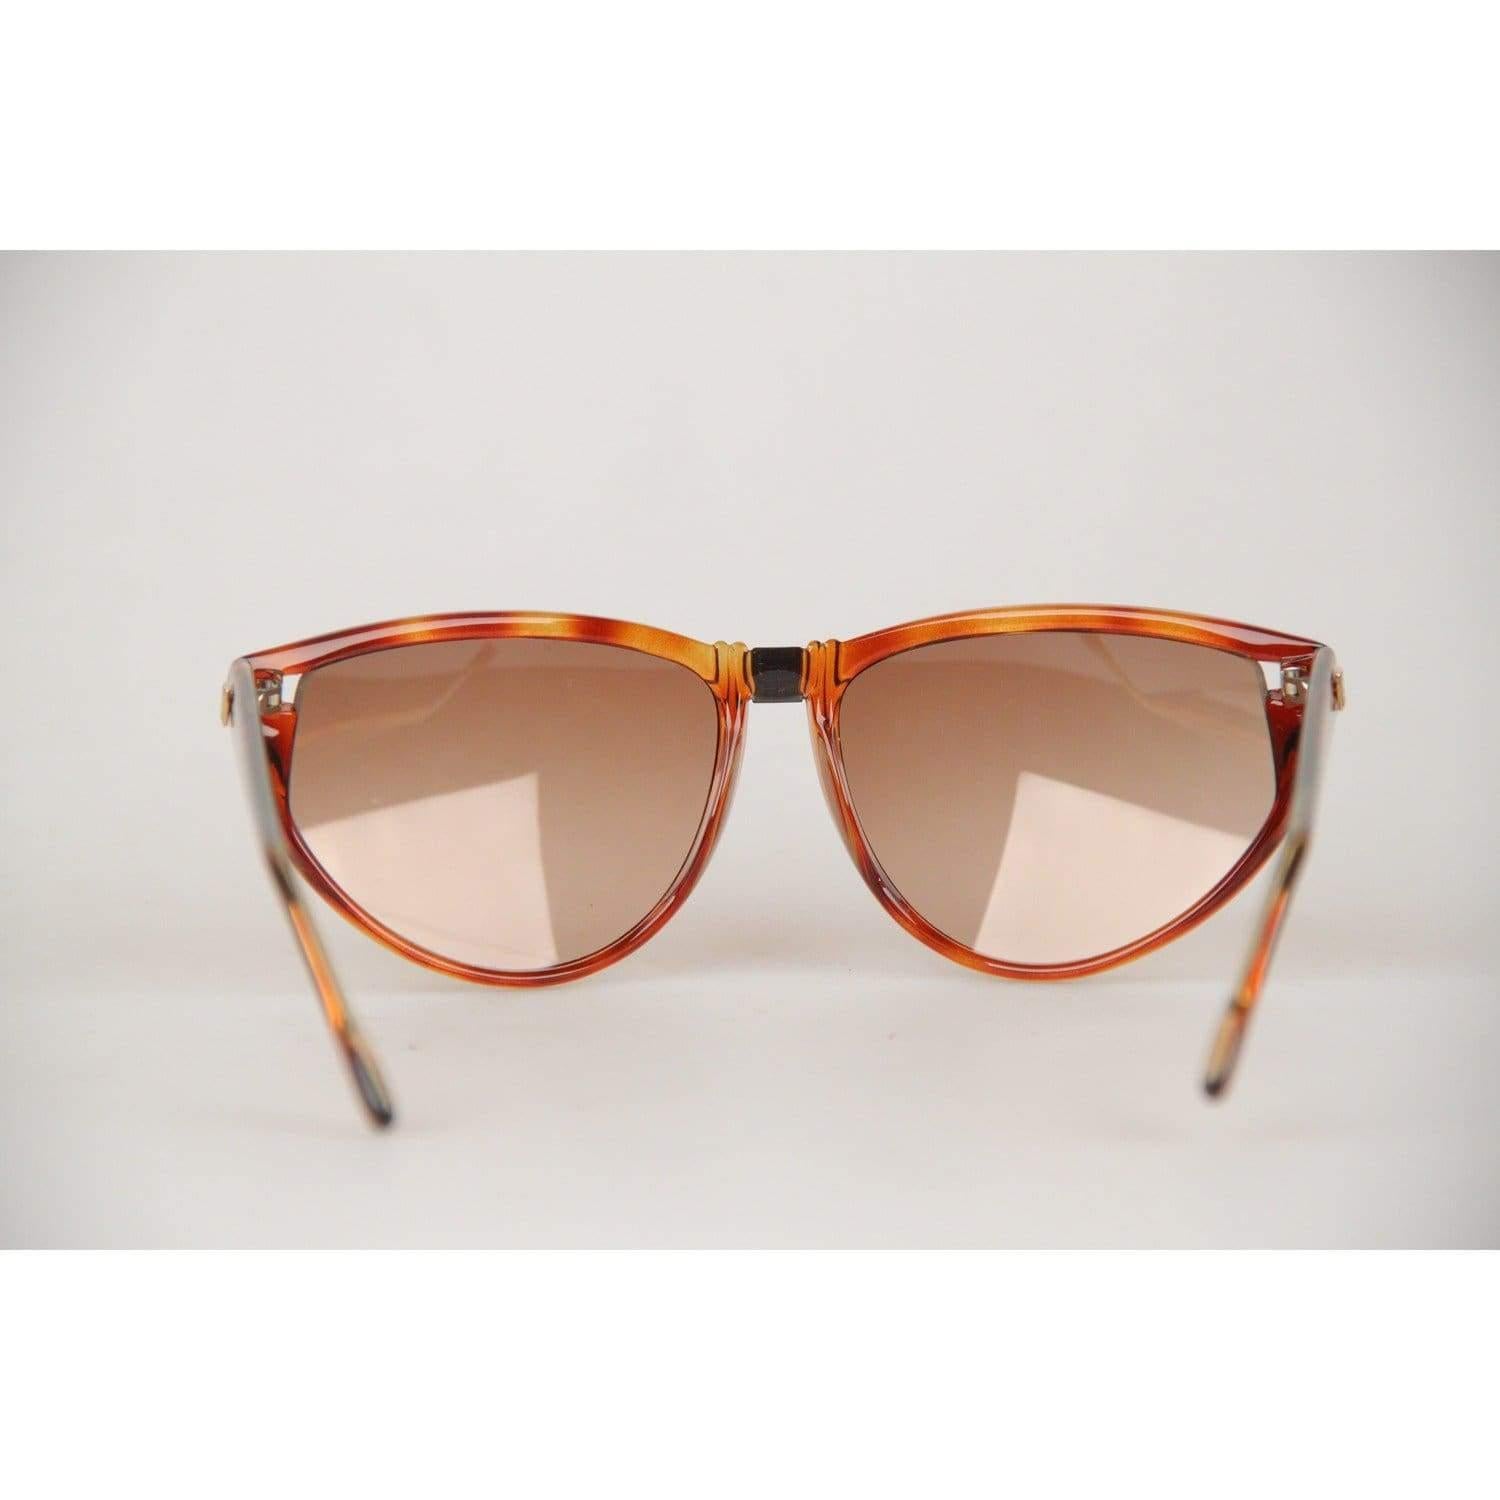 Givenchy Vintage Brown Sunglasses SG01 COL 02 3